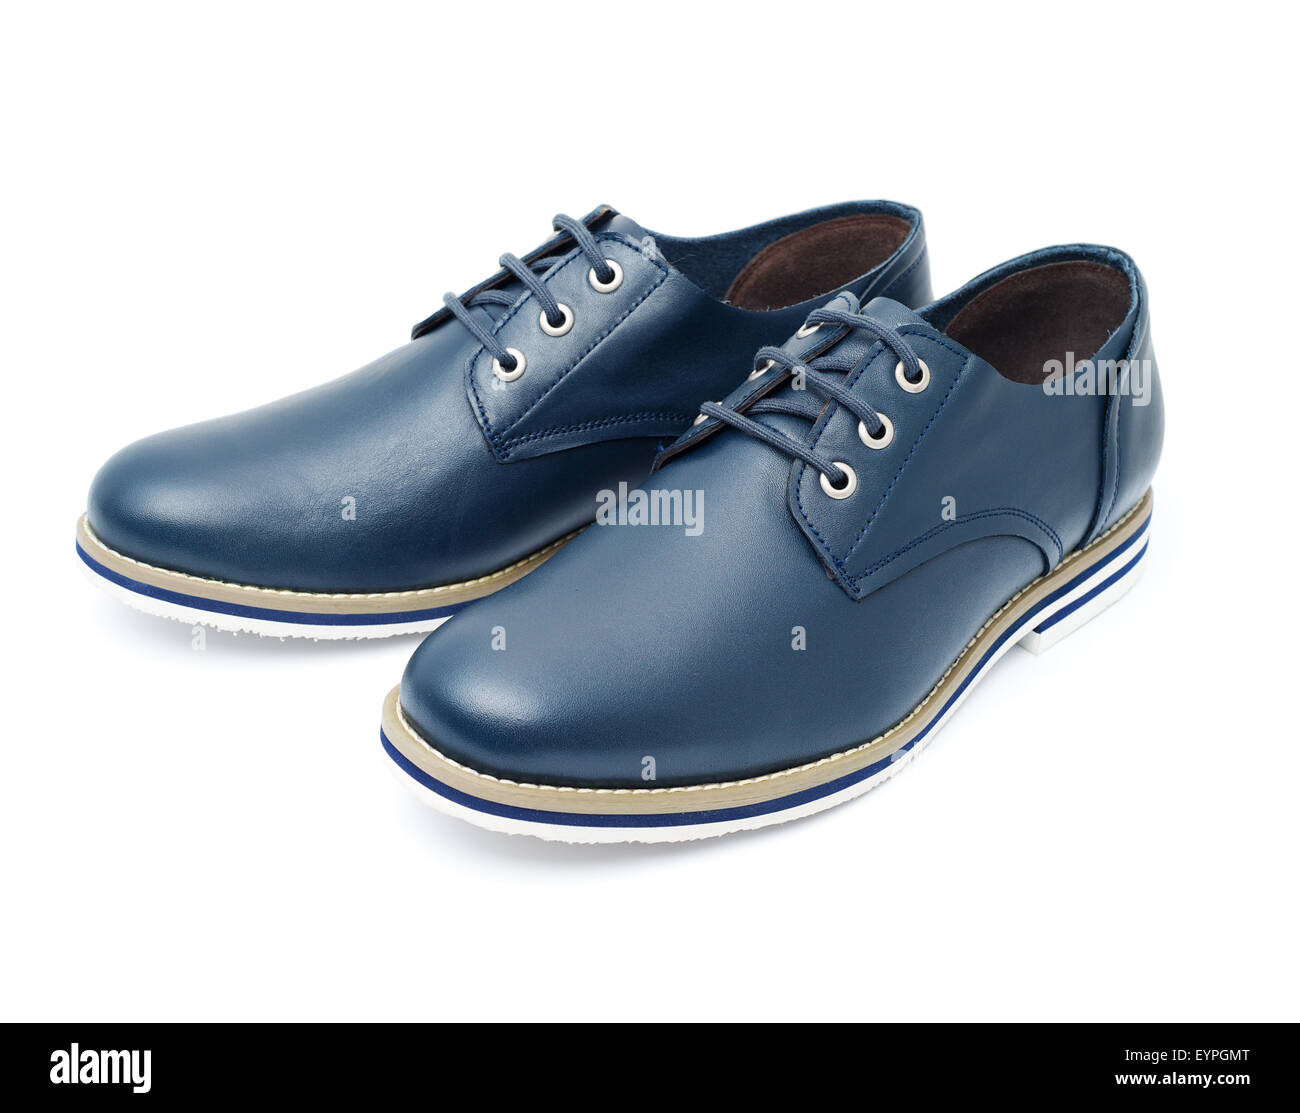 Men's fashion shoes blue, casual design on a white background isolated Stock Photo